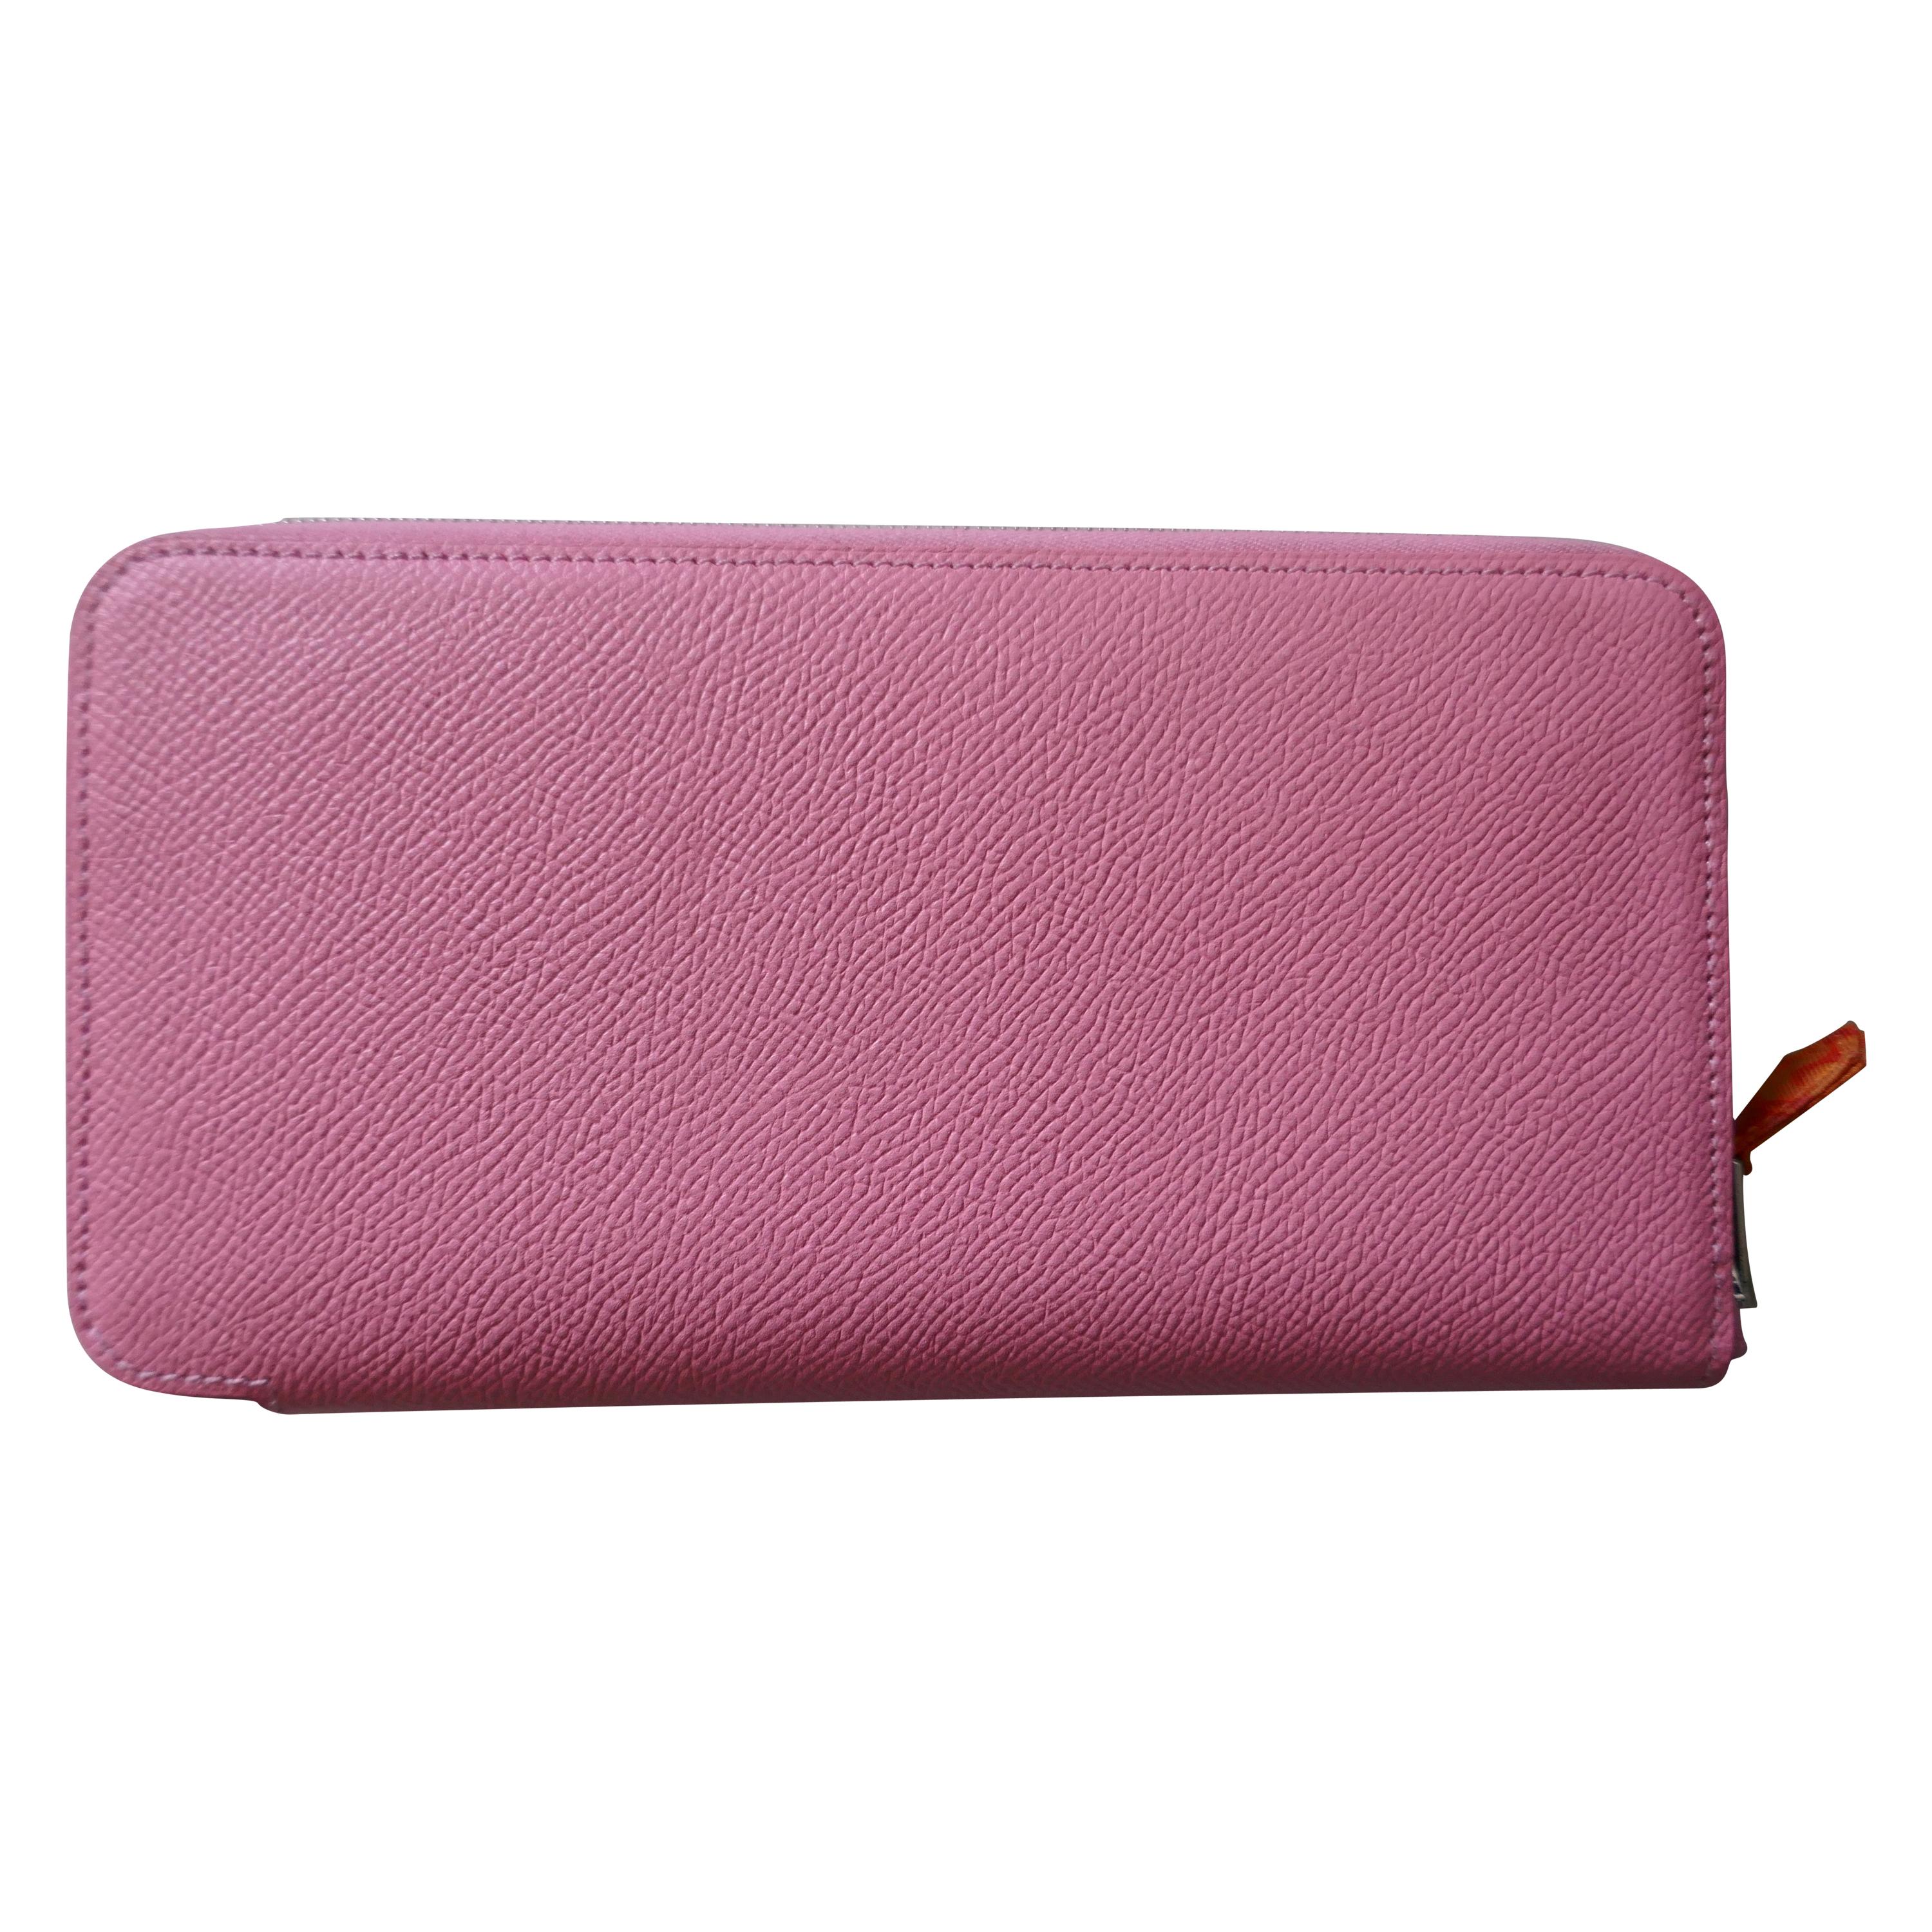 Ladies Hermes “Silk-In Classiuqe” Long Wallet in Rose Confetti Epsom Leather